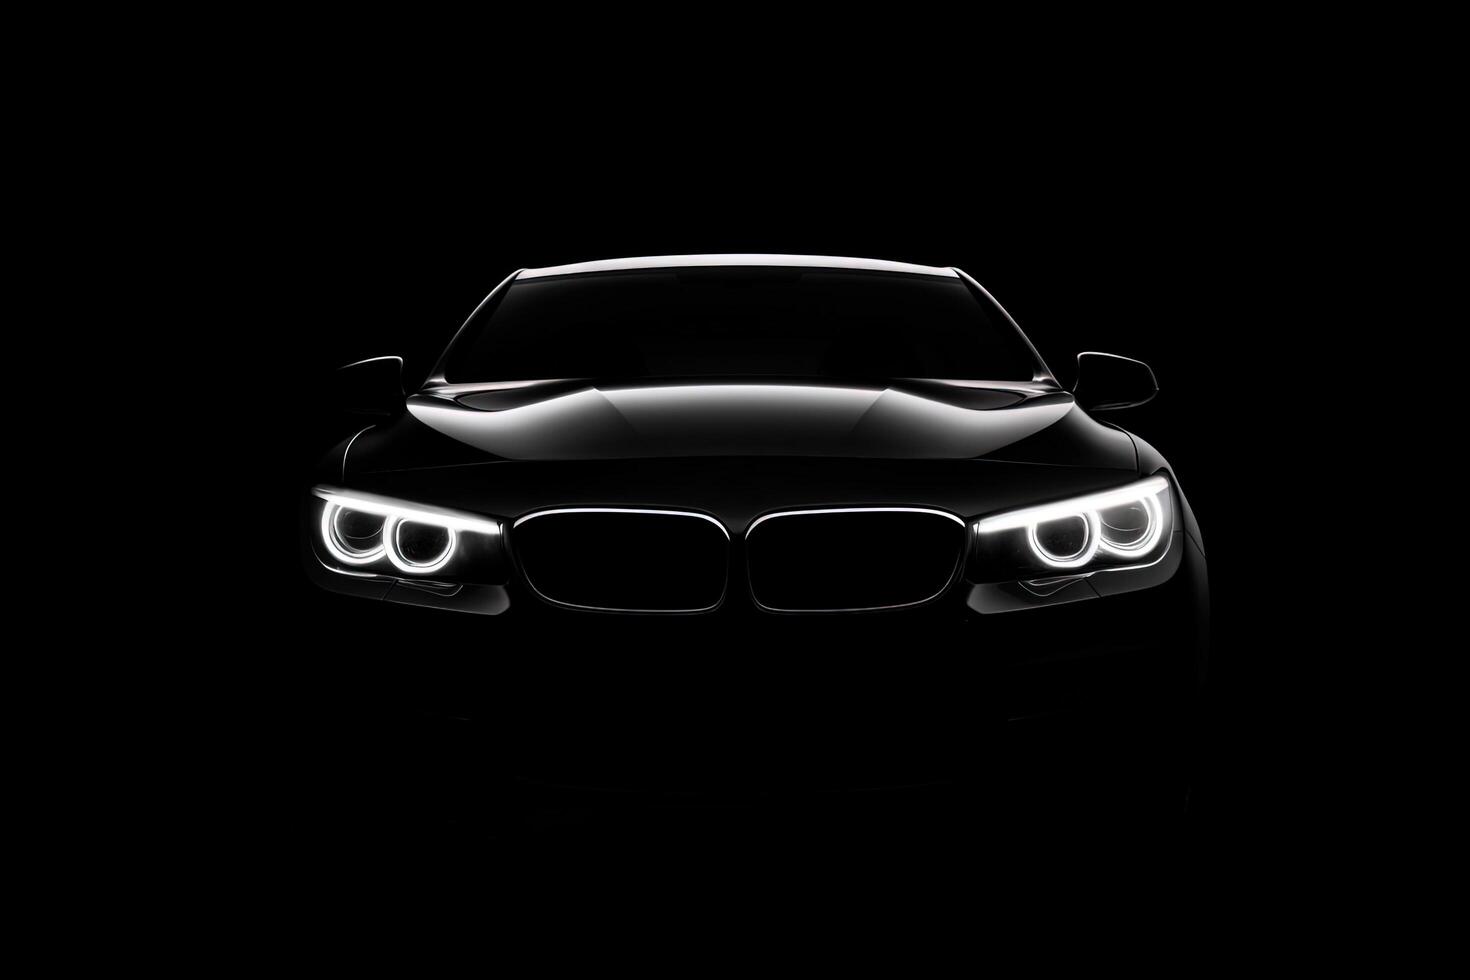 Front view dark silhouette of a modern luxury black car isolated on black background. photo